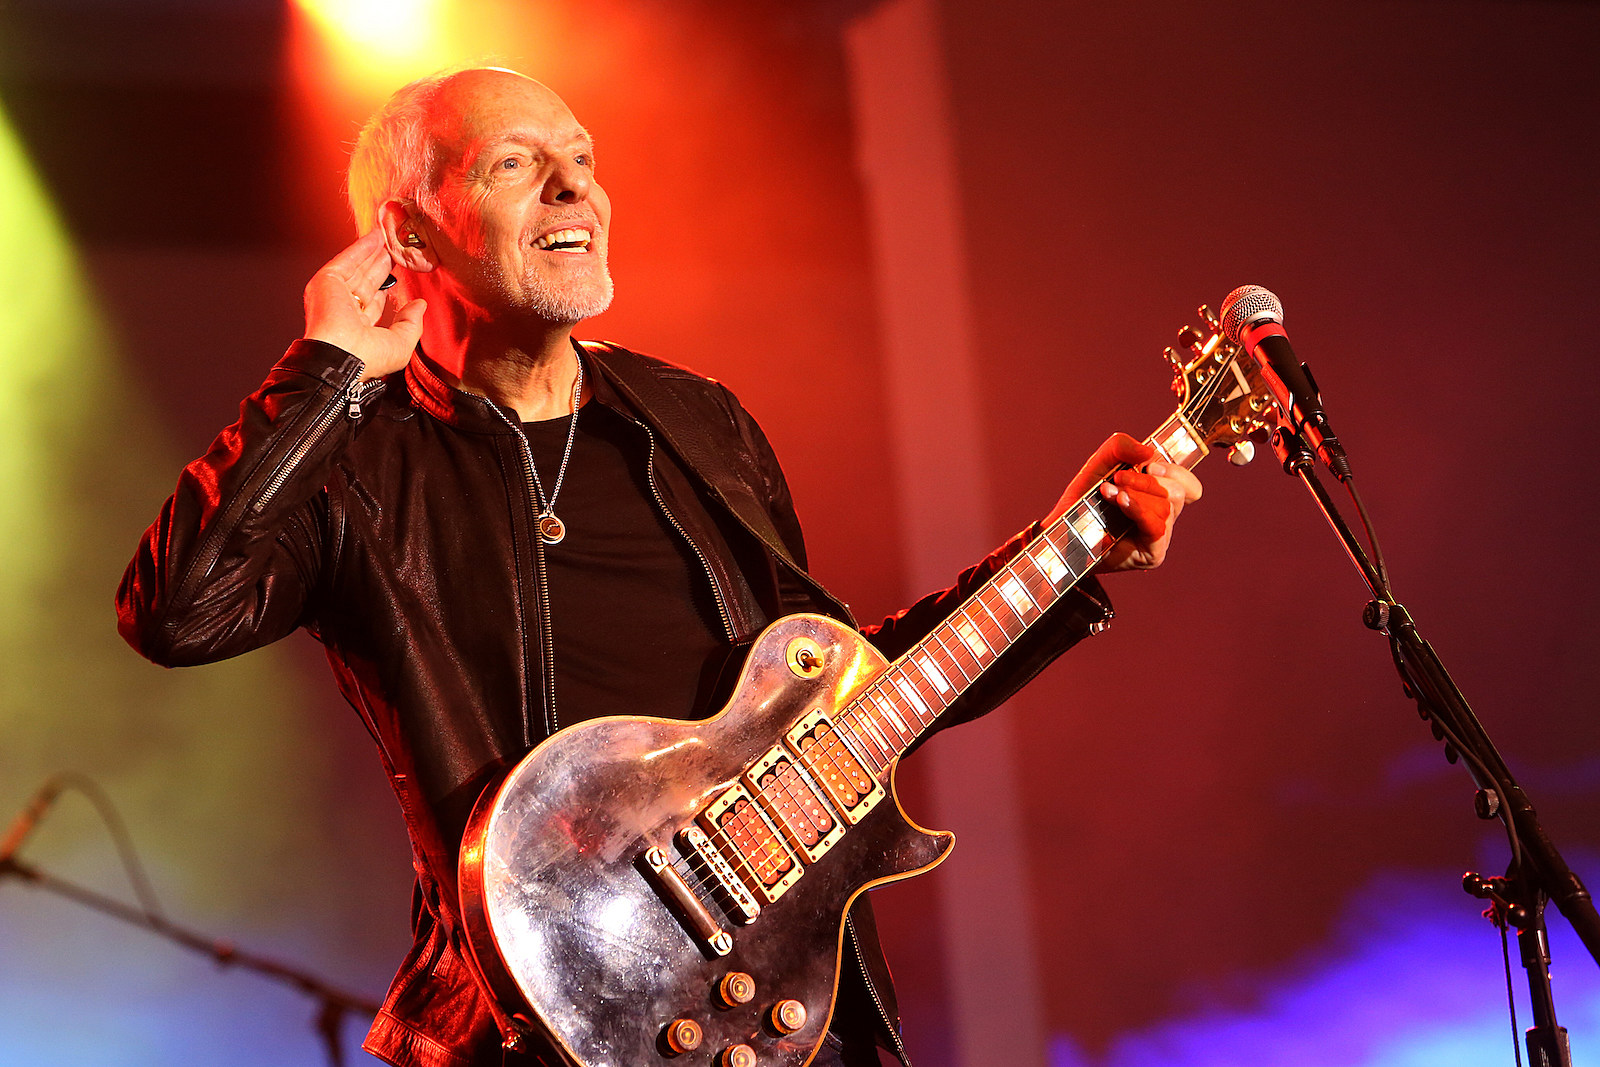 Watch Peter Frampton Close Out Final Tour With a Beatles Cover